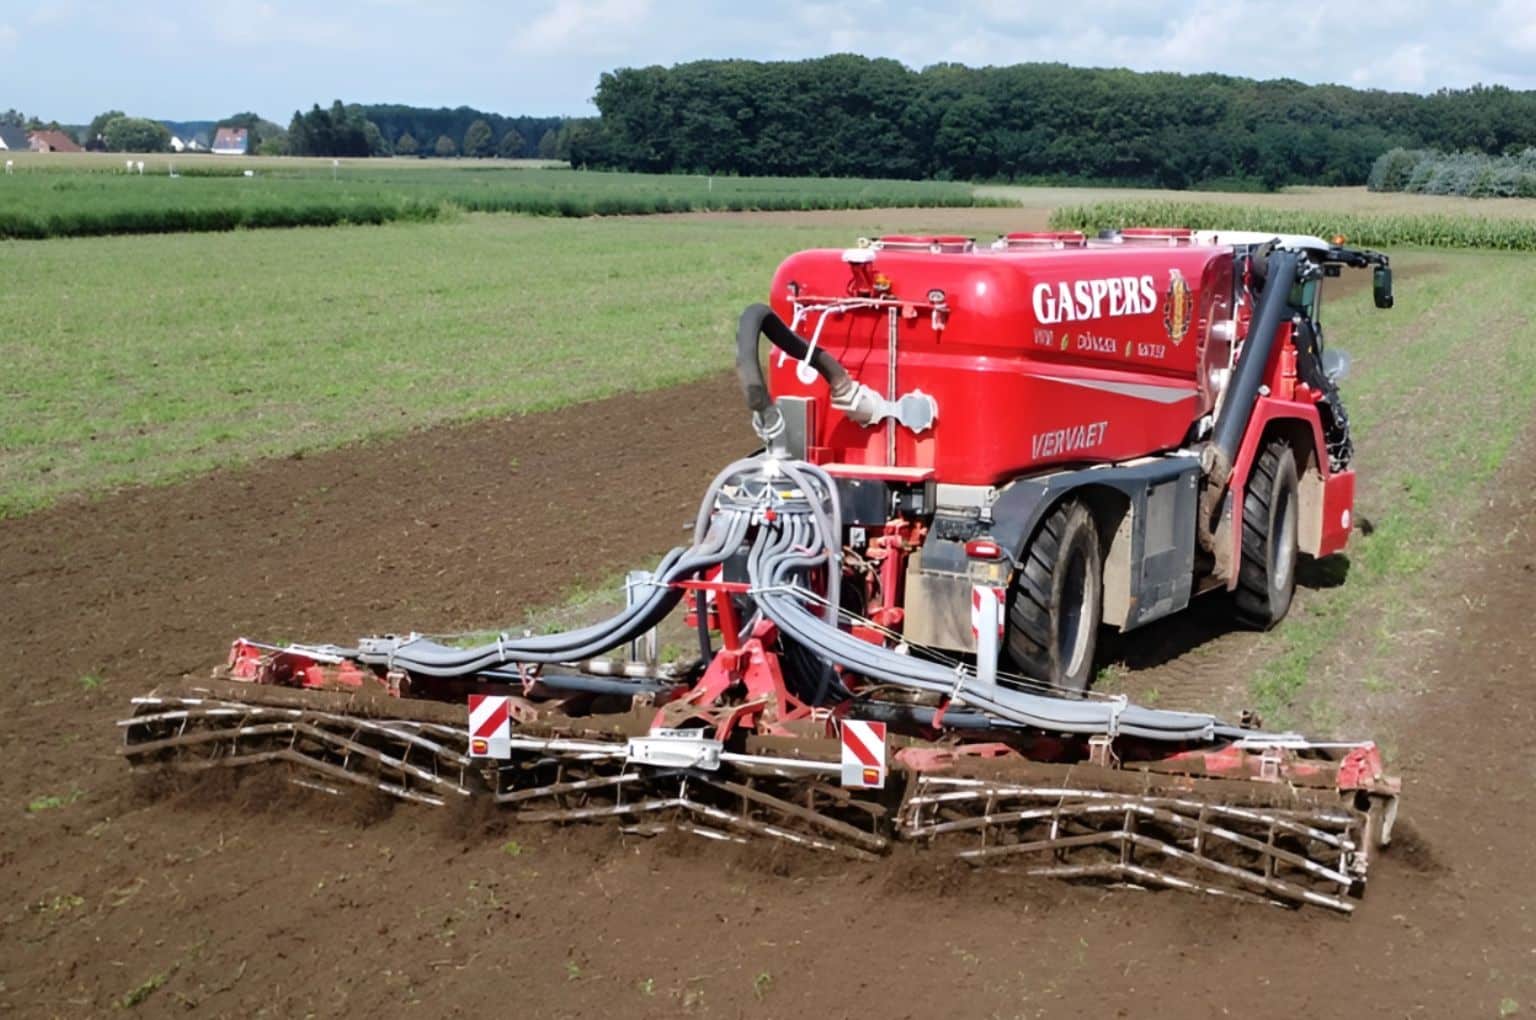 Evers Toric XL operates 9m wide